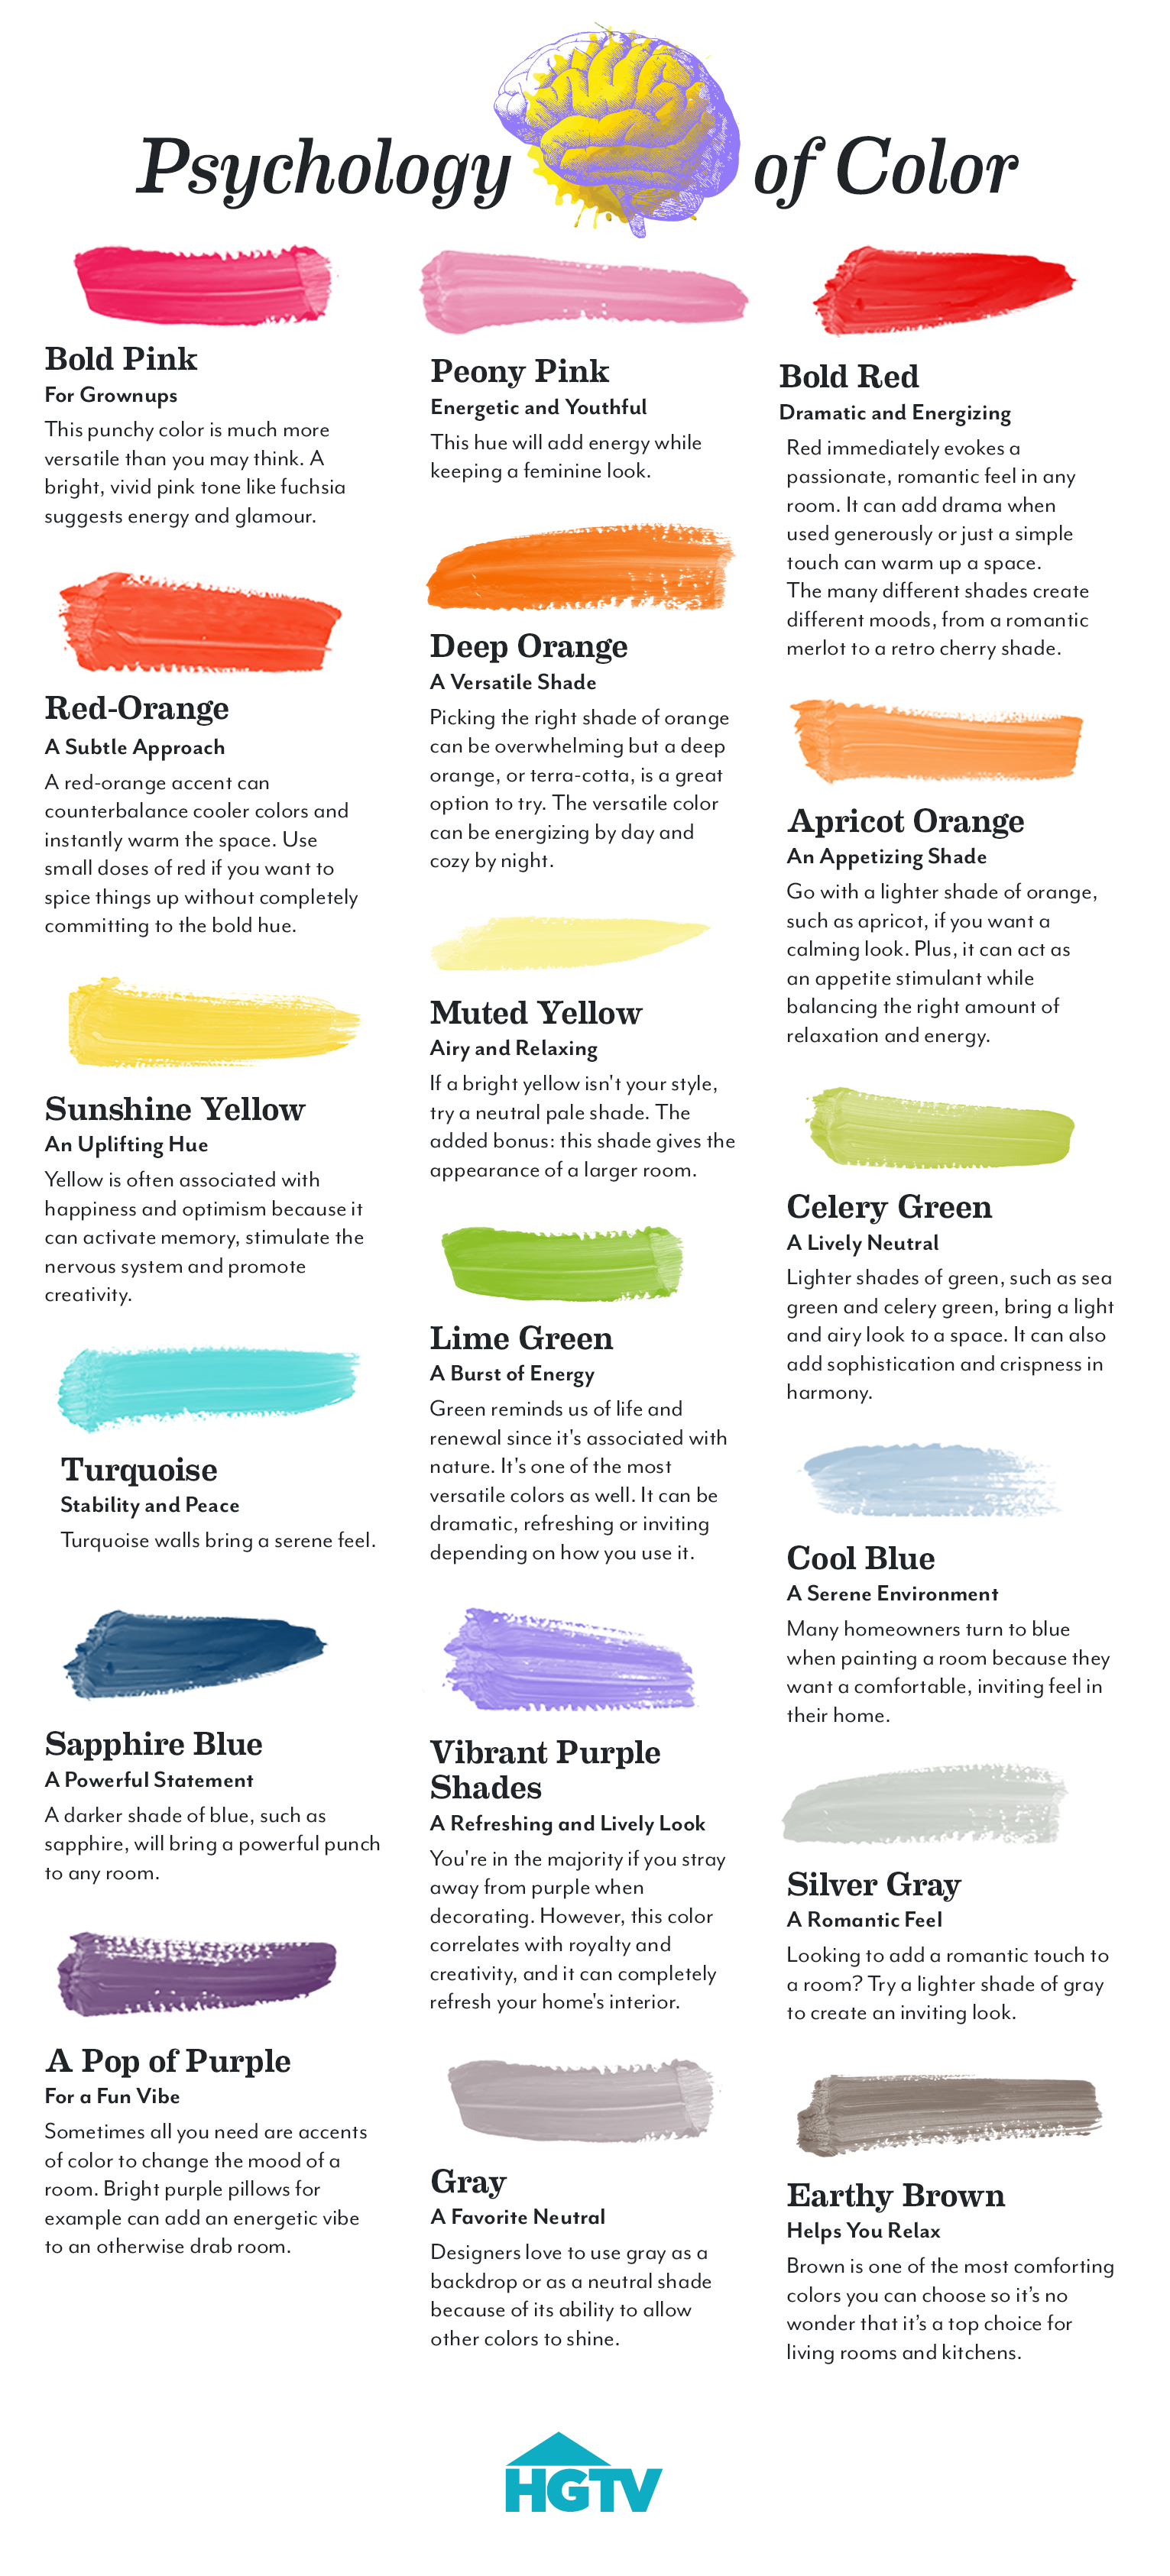 Psychology of Color Why We Love Certain Shades   HGTV